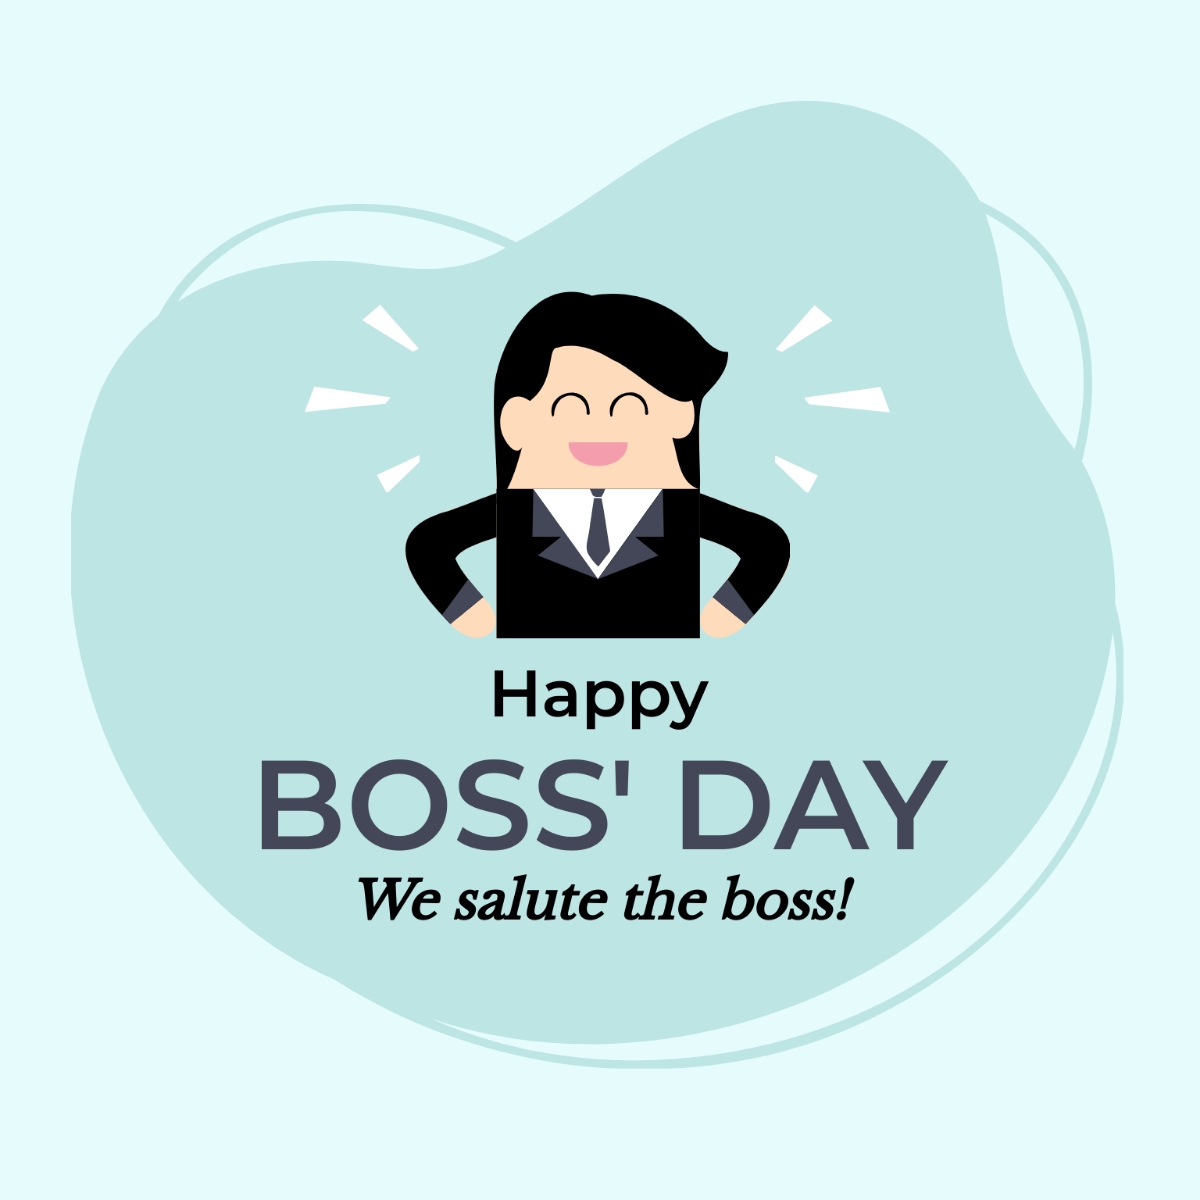 Boss' Day Poster Vector Template